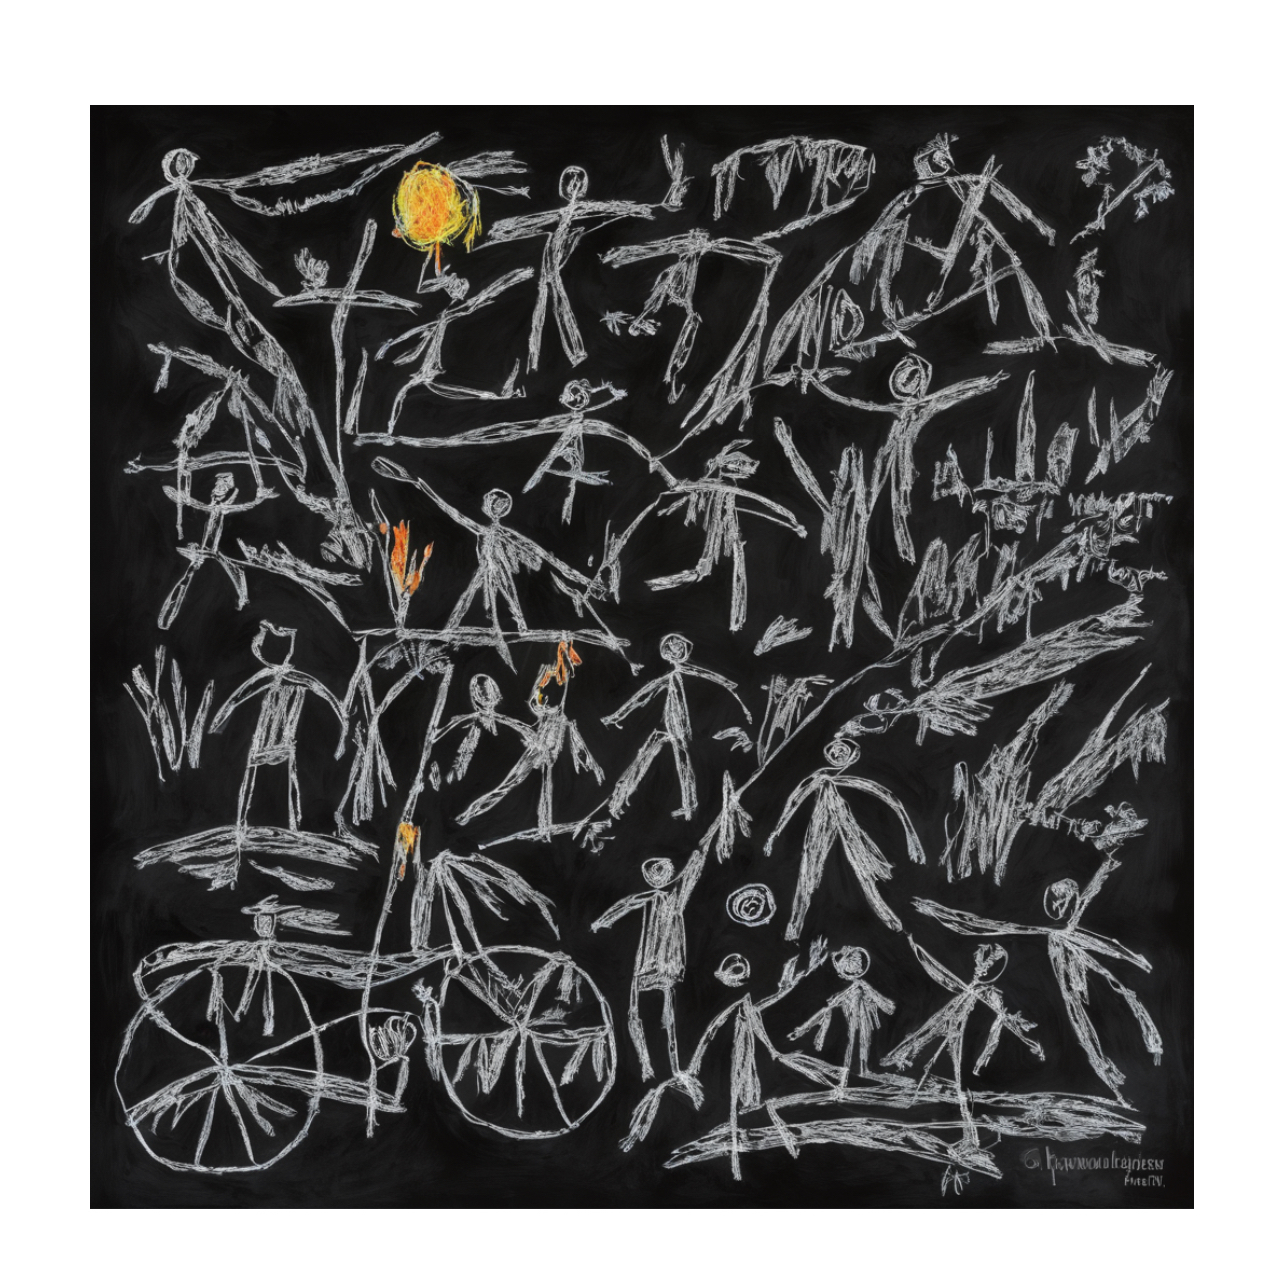 Childlike drawing of figures and bicycles on black background, evokes playful music theme